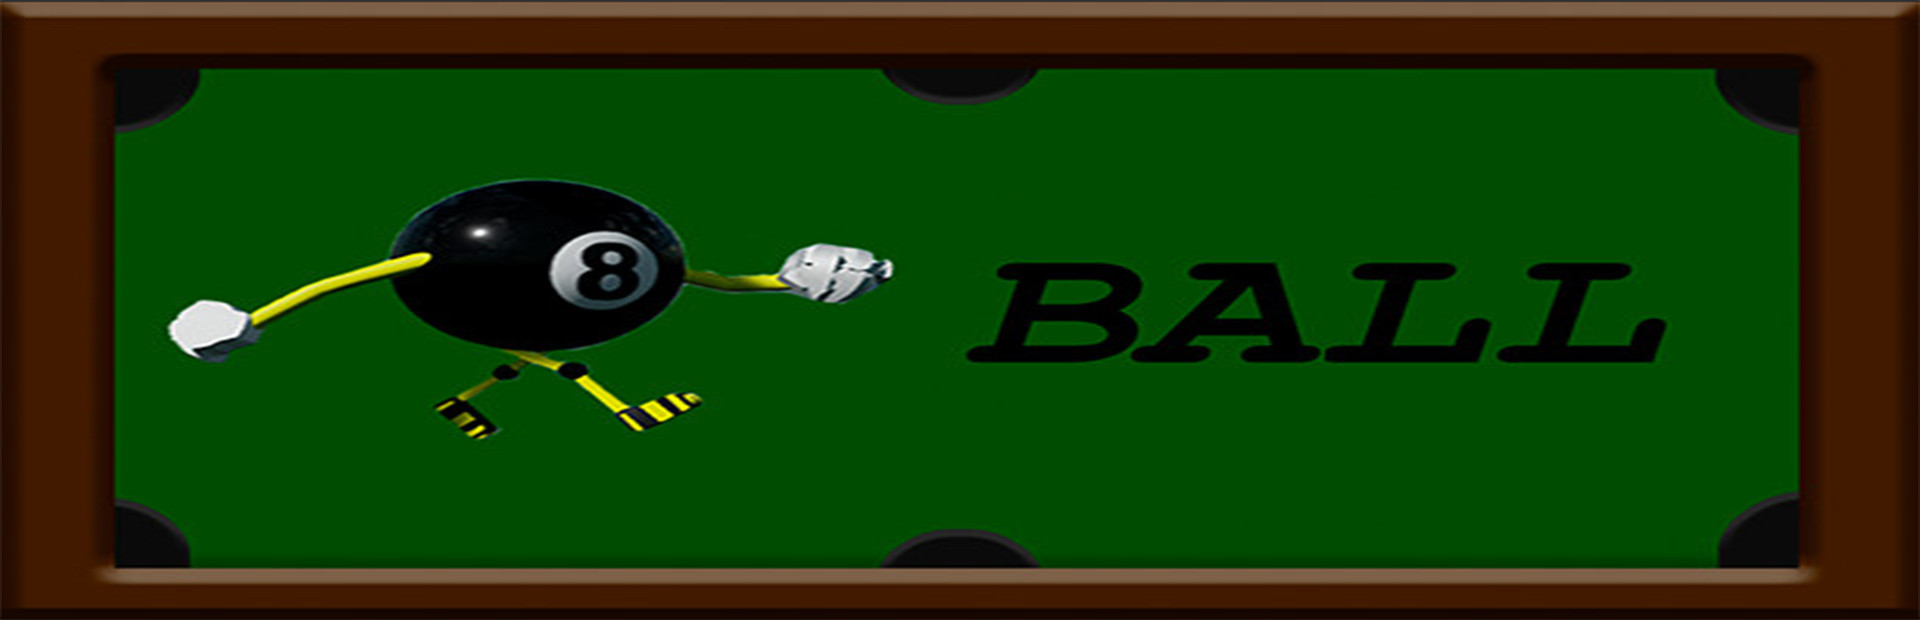 8 Ball cover image